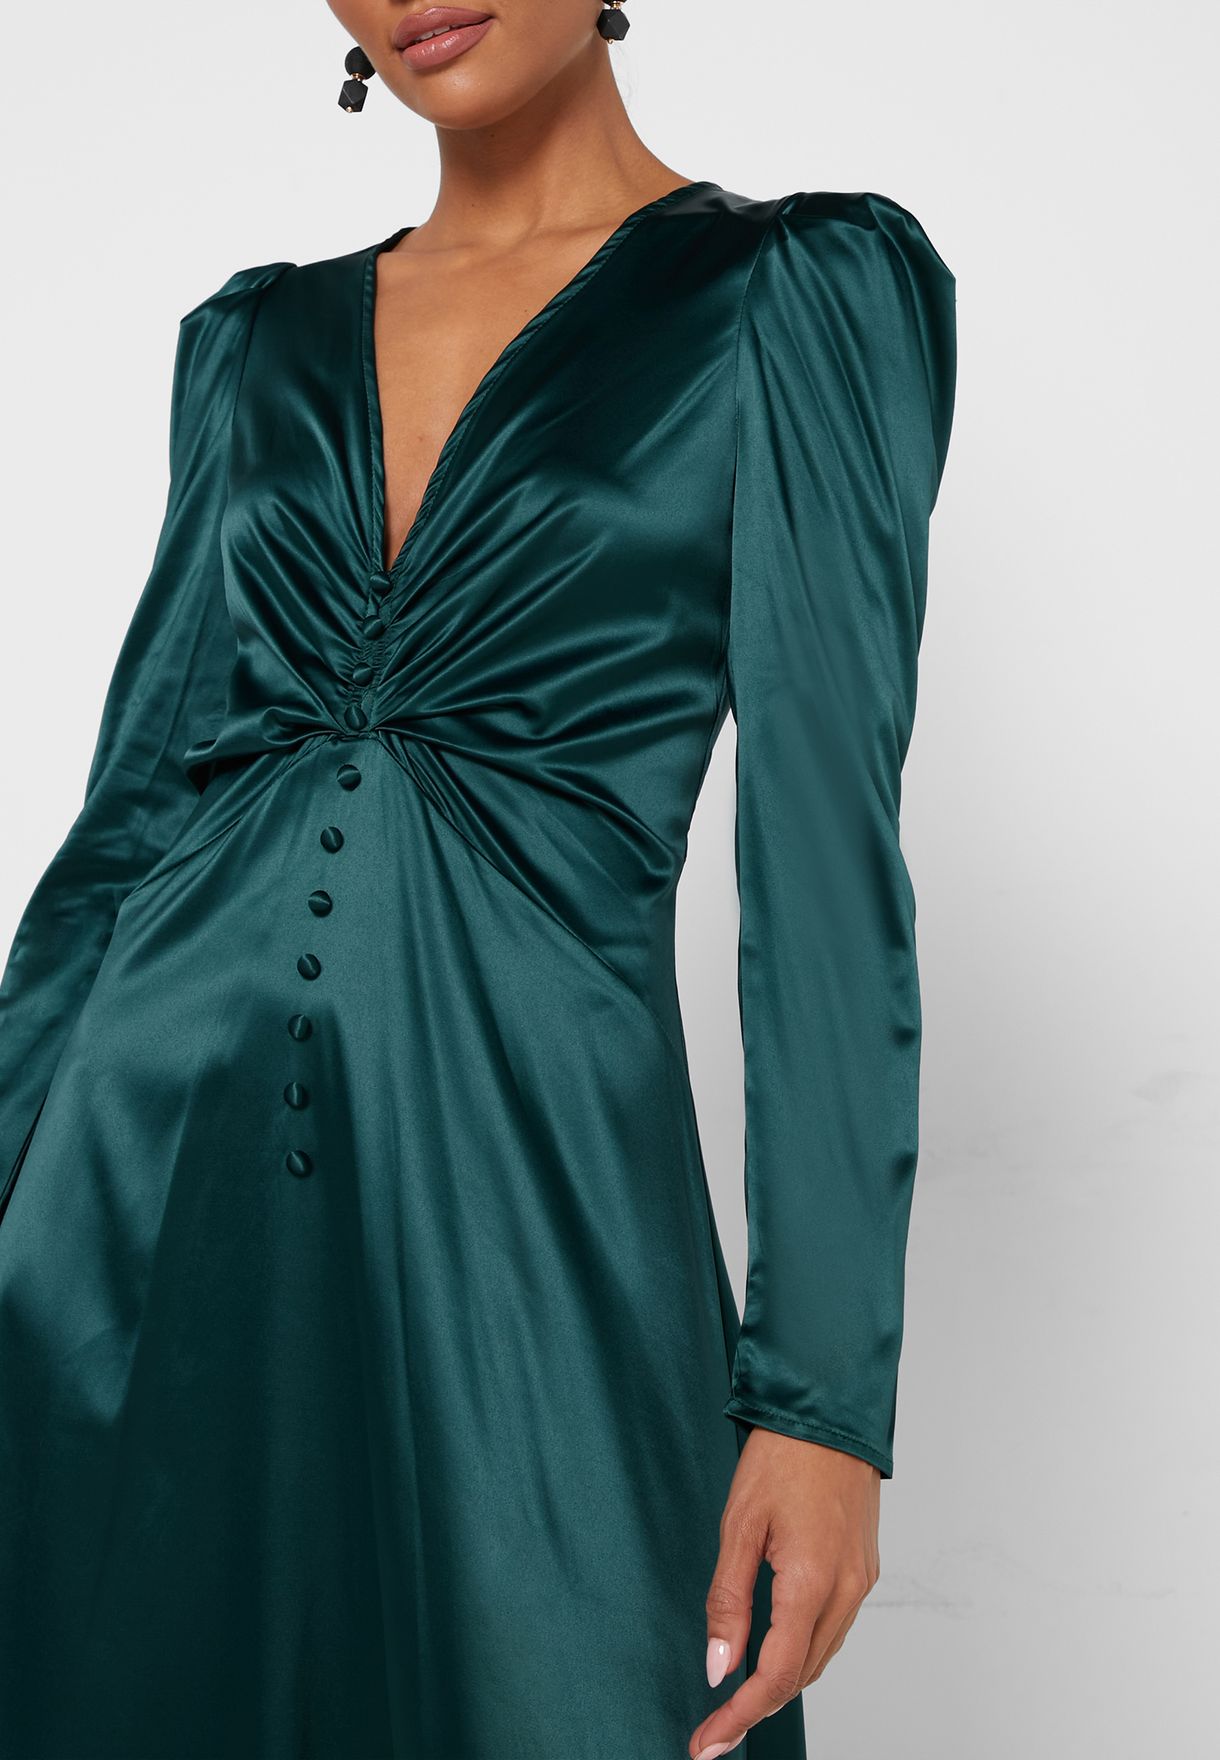 Ruched Detail Buttoned Dress